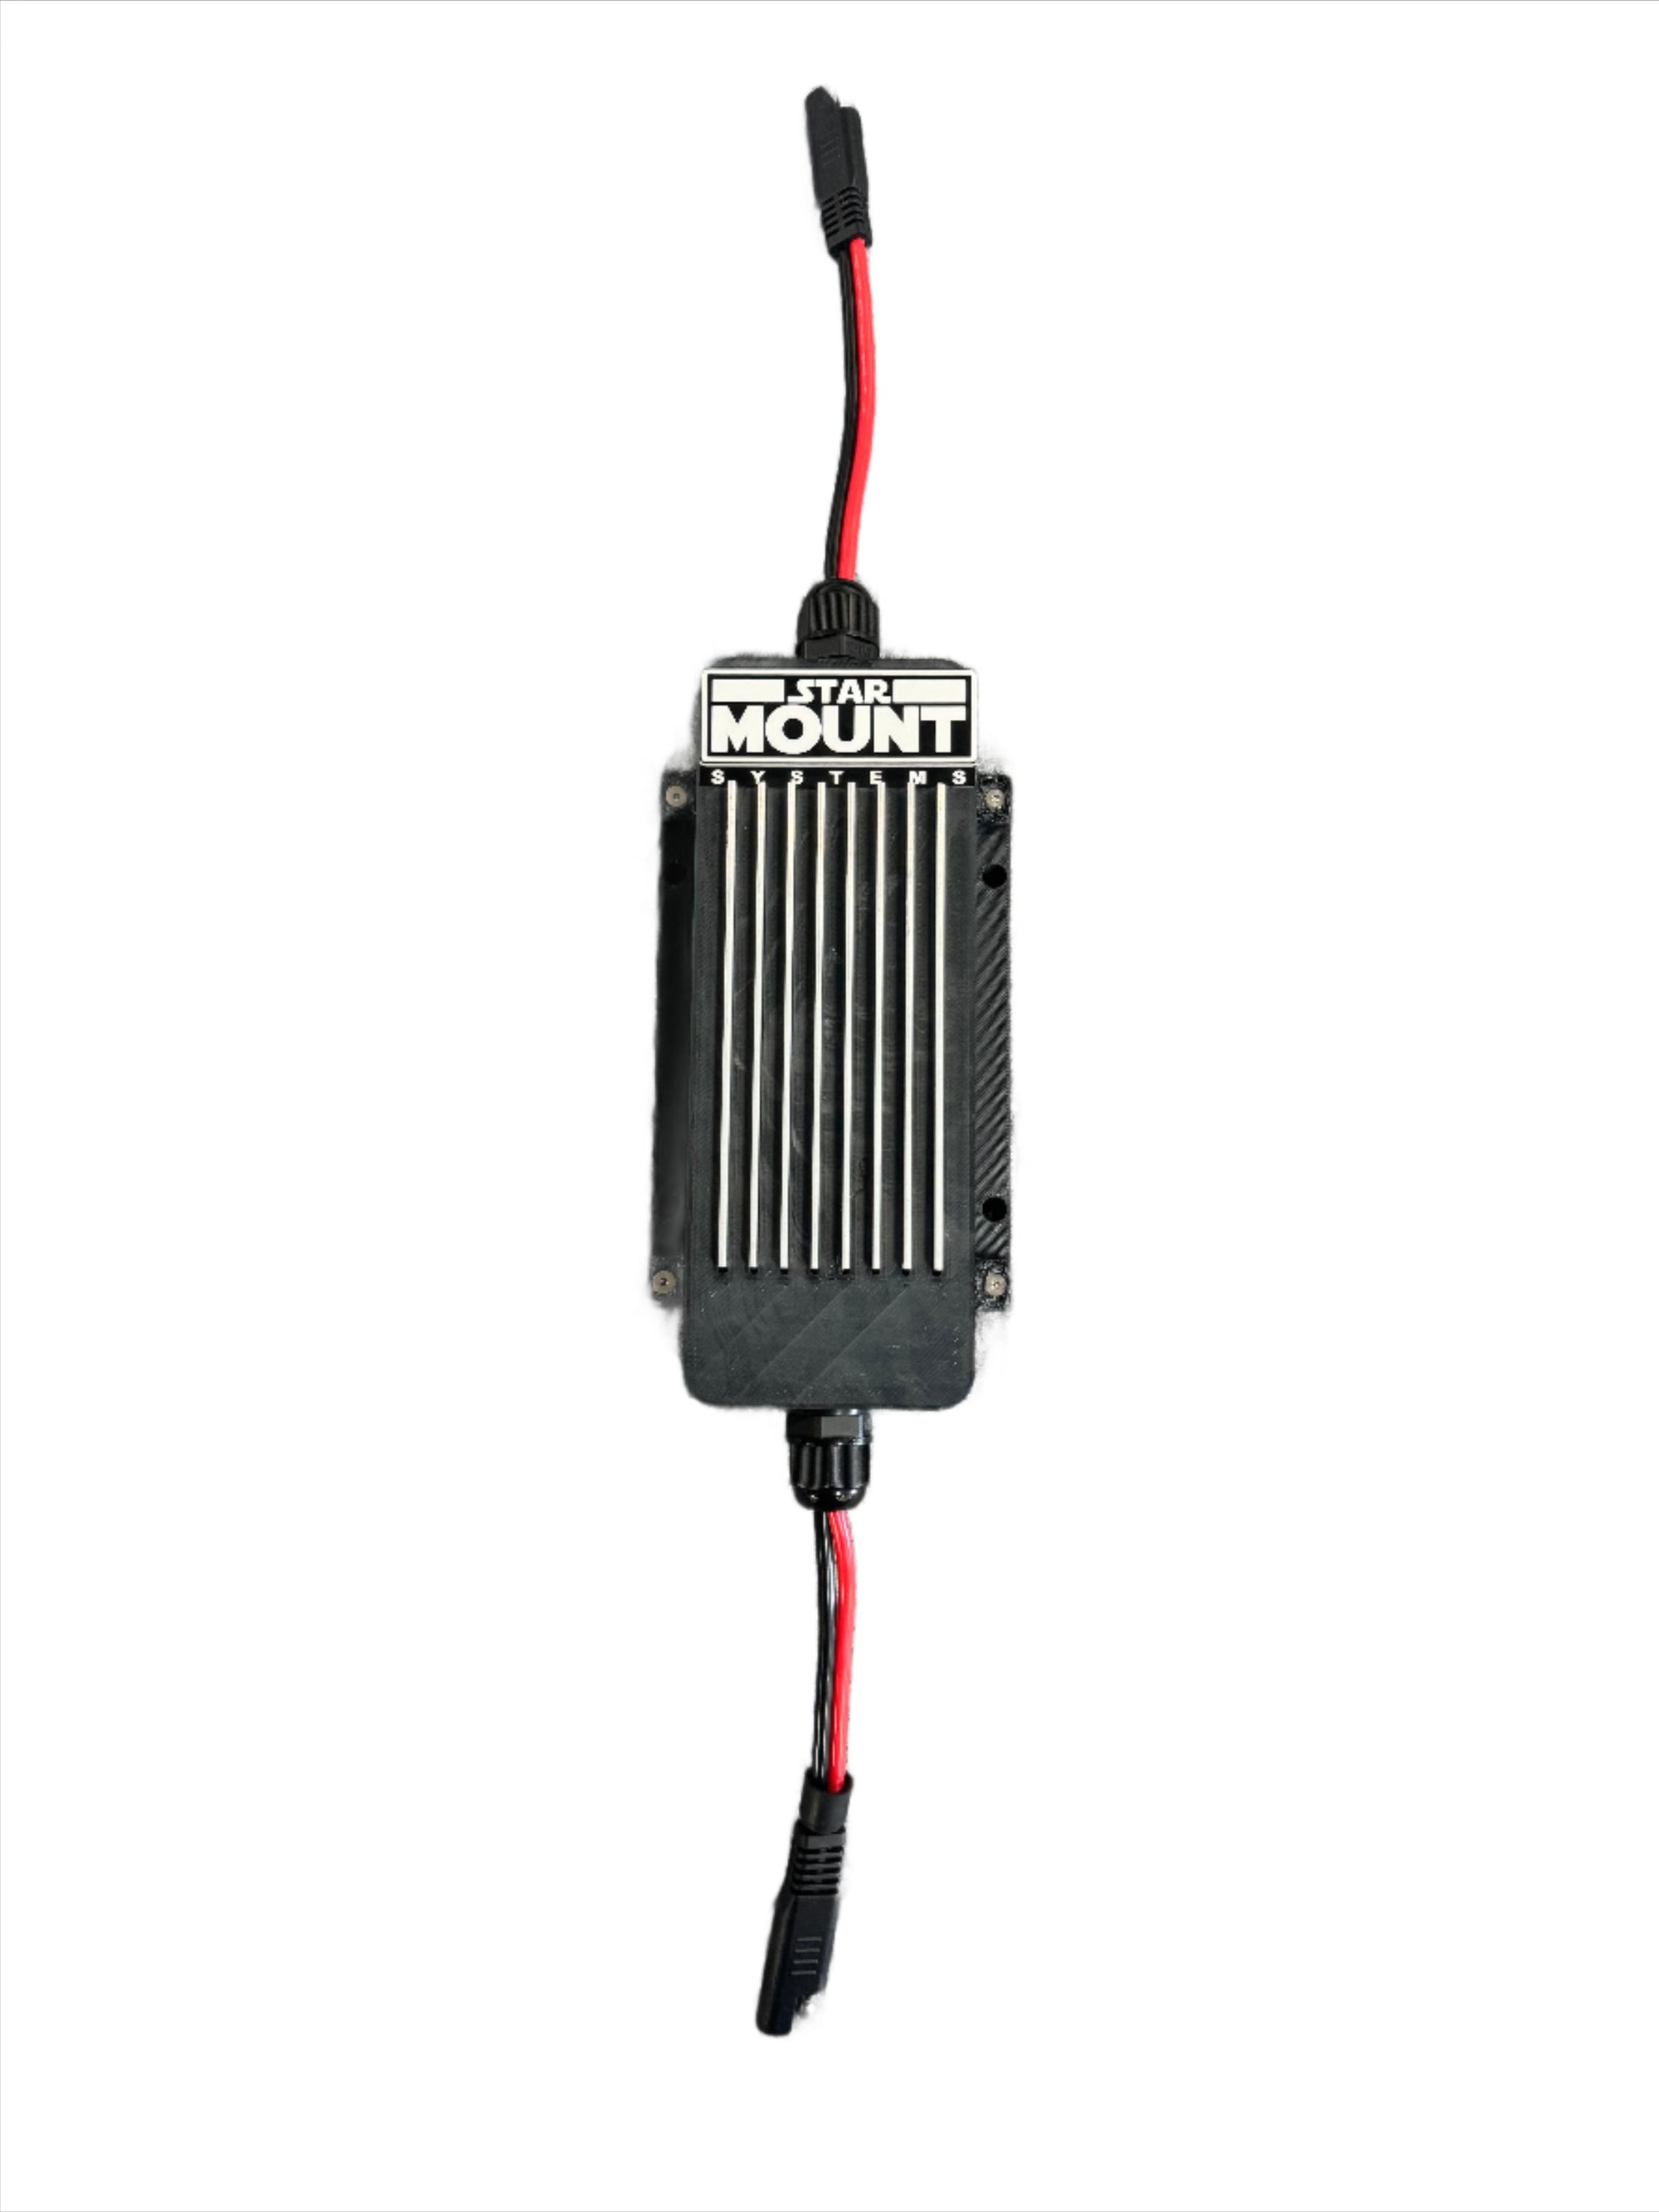 Extra DC Power Cable for Gen3 Star-Box, Star-Box Pro and High Performance 12v Kits